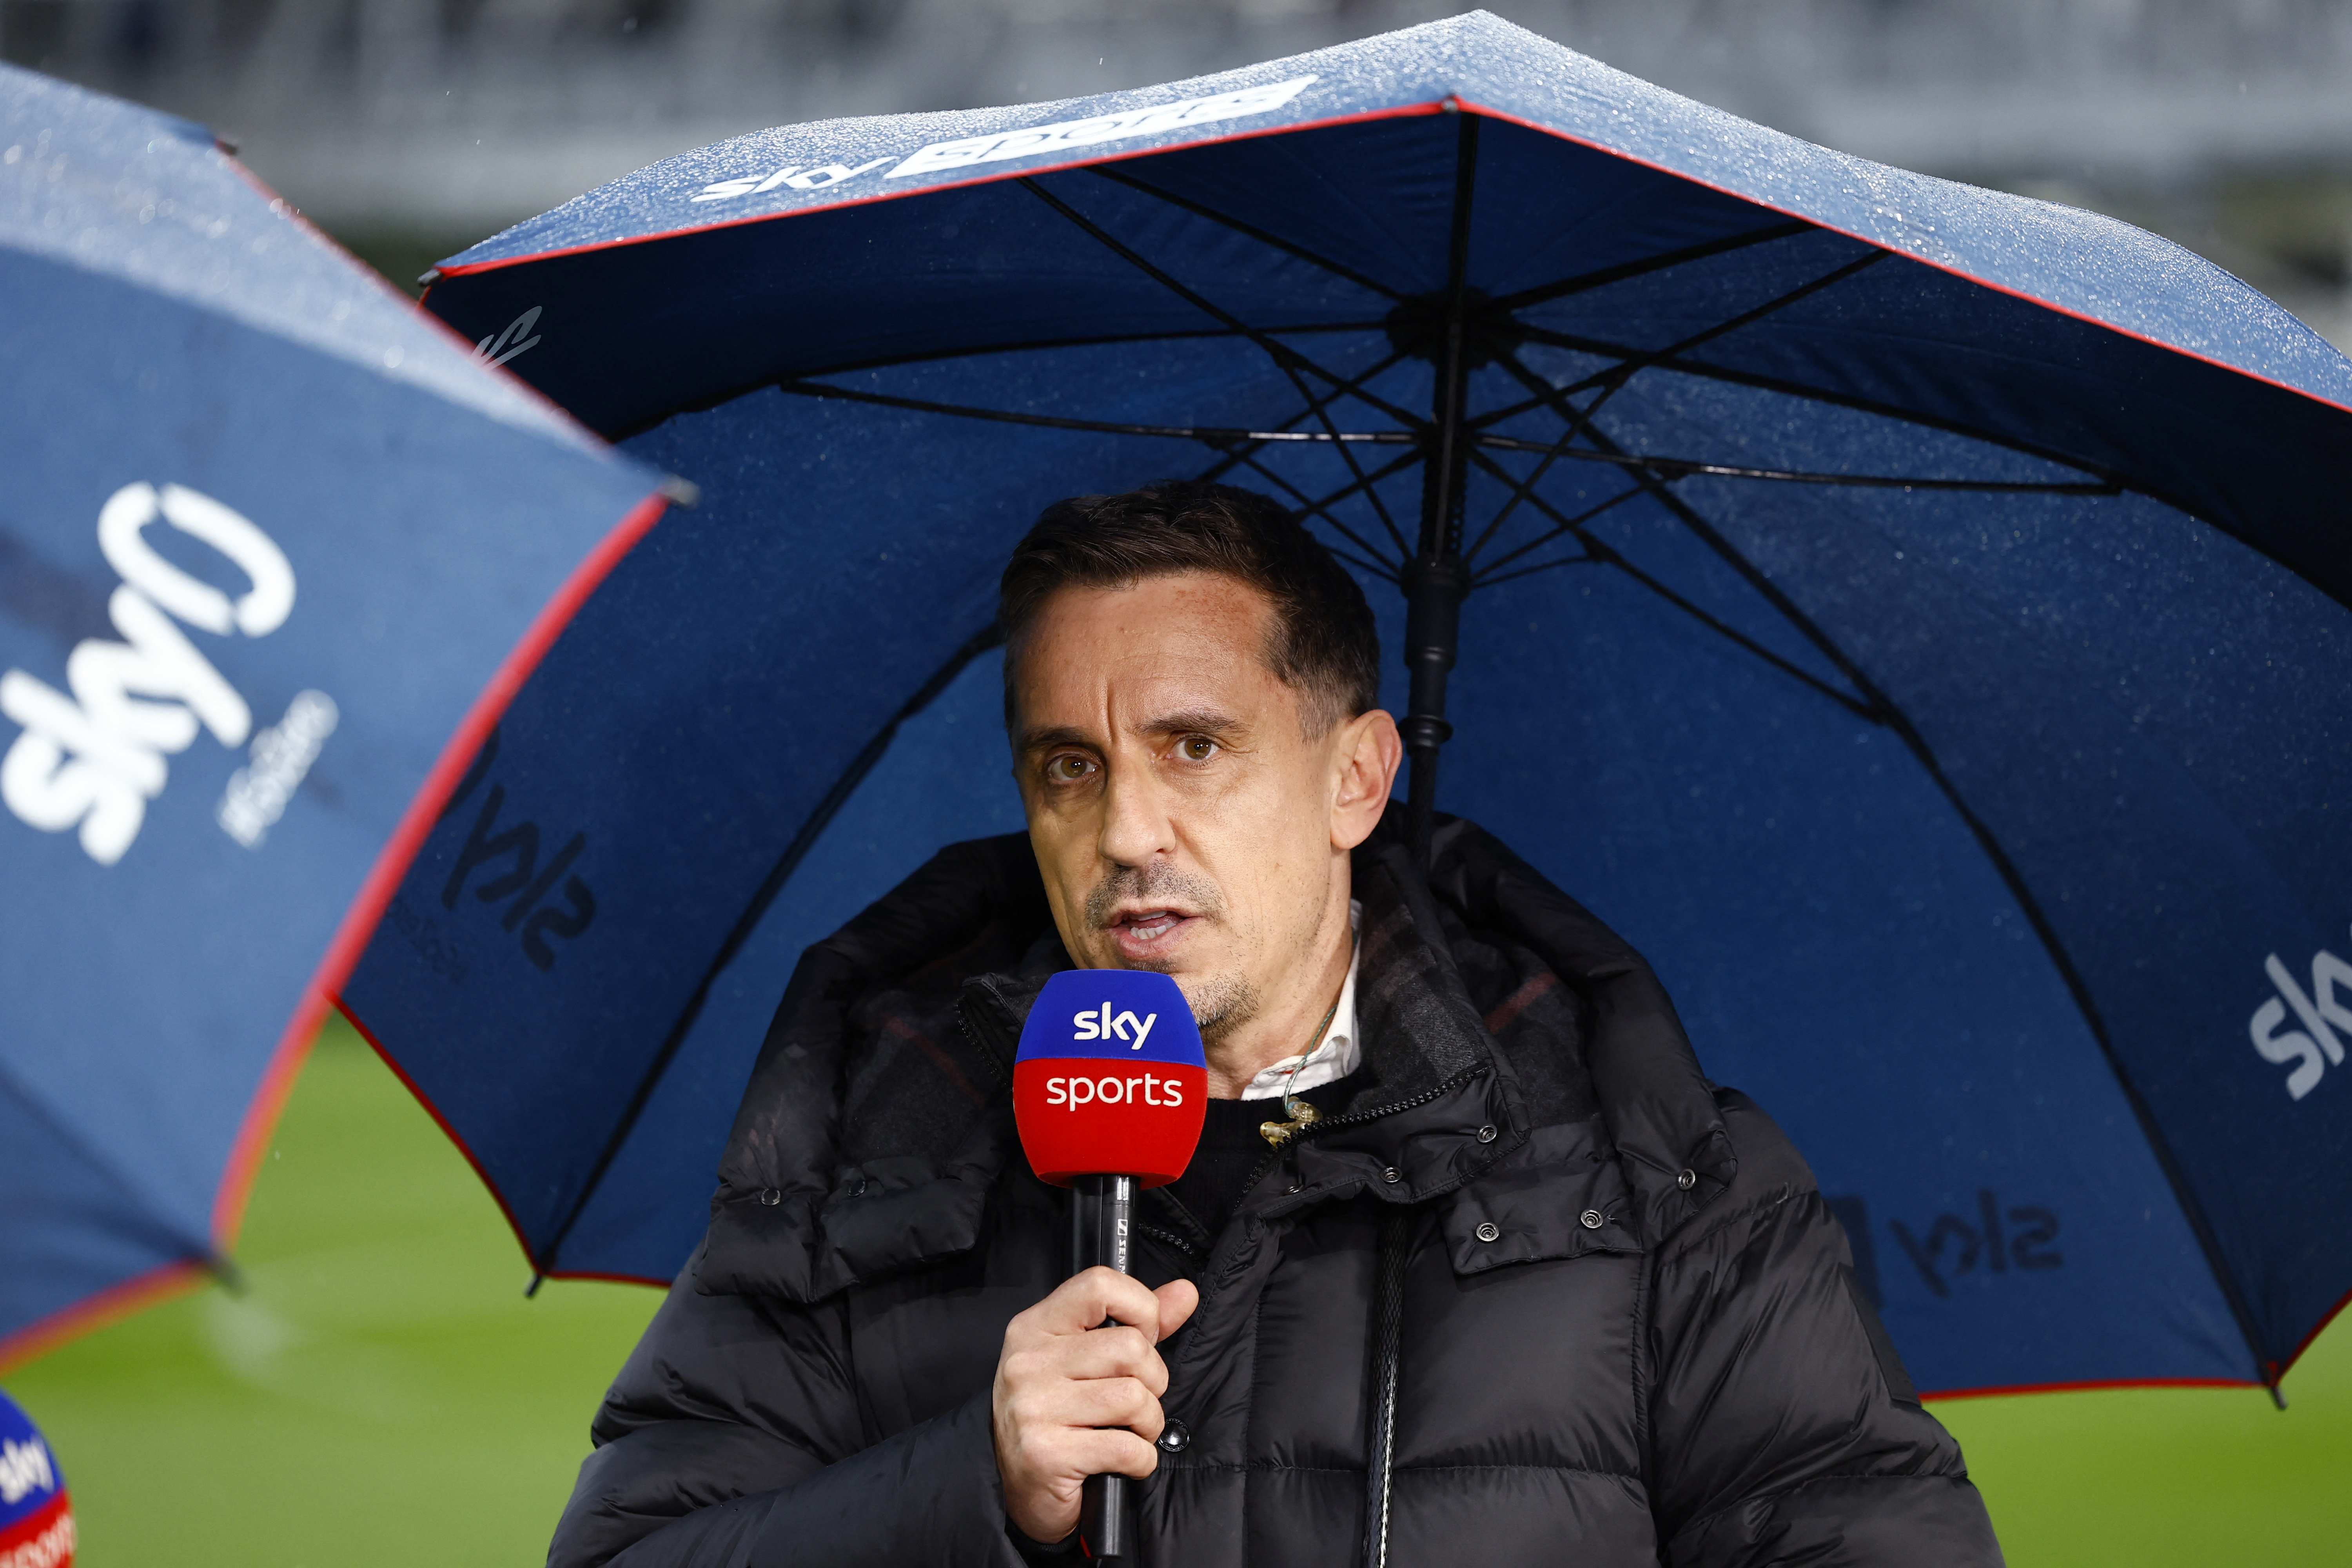 Gary Neville's comments have allegedly led to Forest launching legal action against Sky Sports